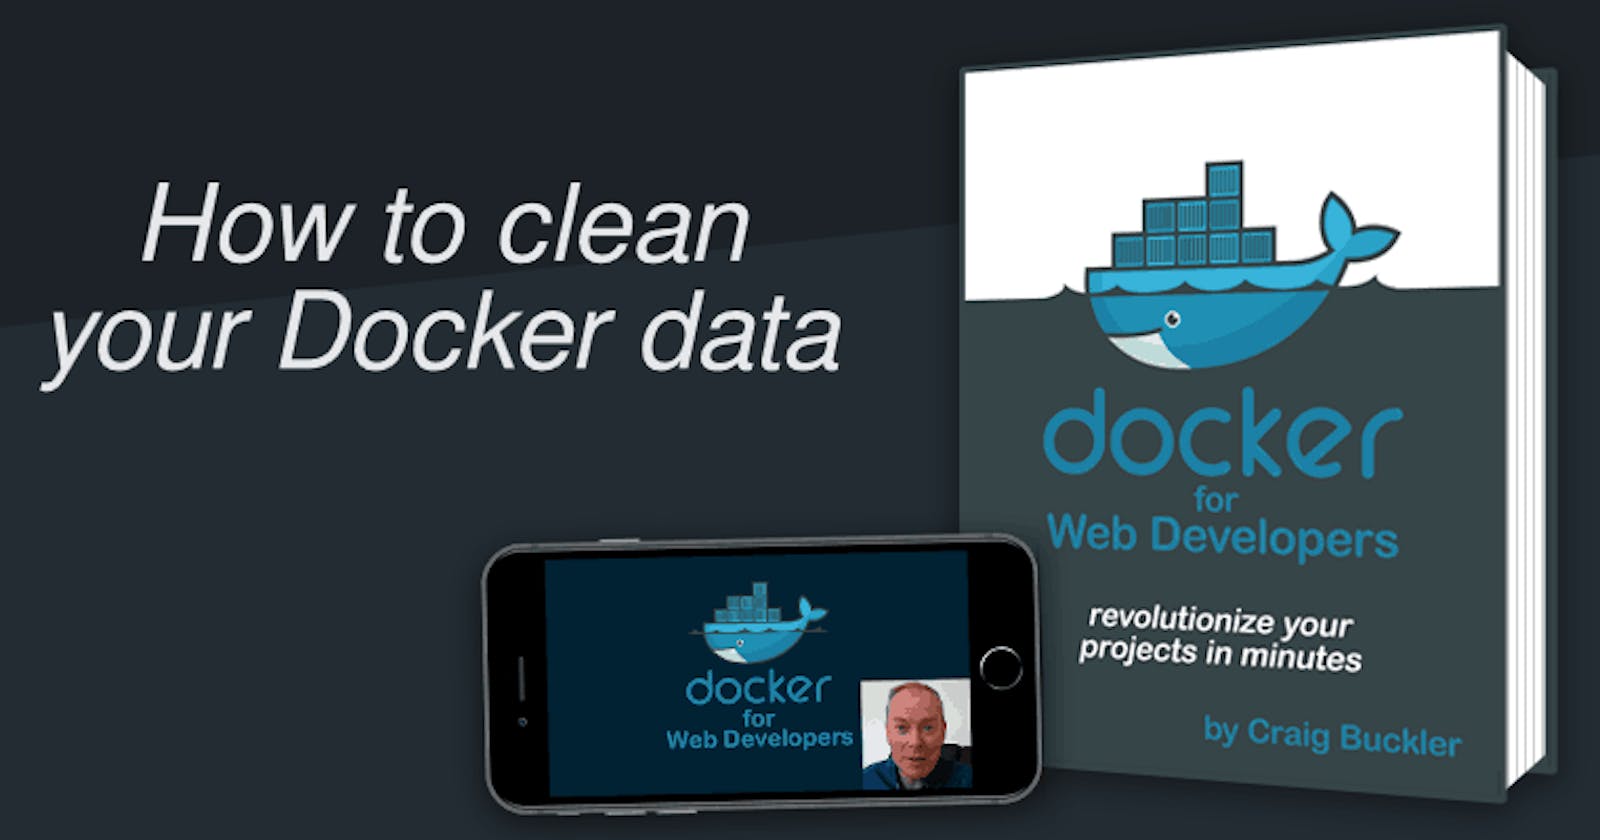 How to clean your Docker data